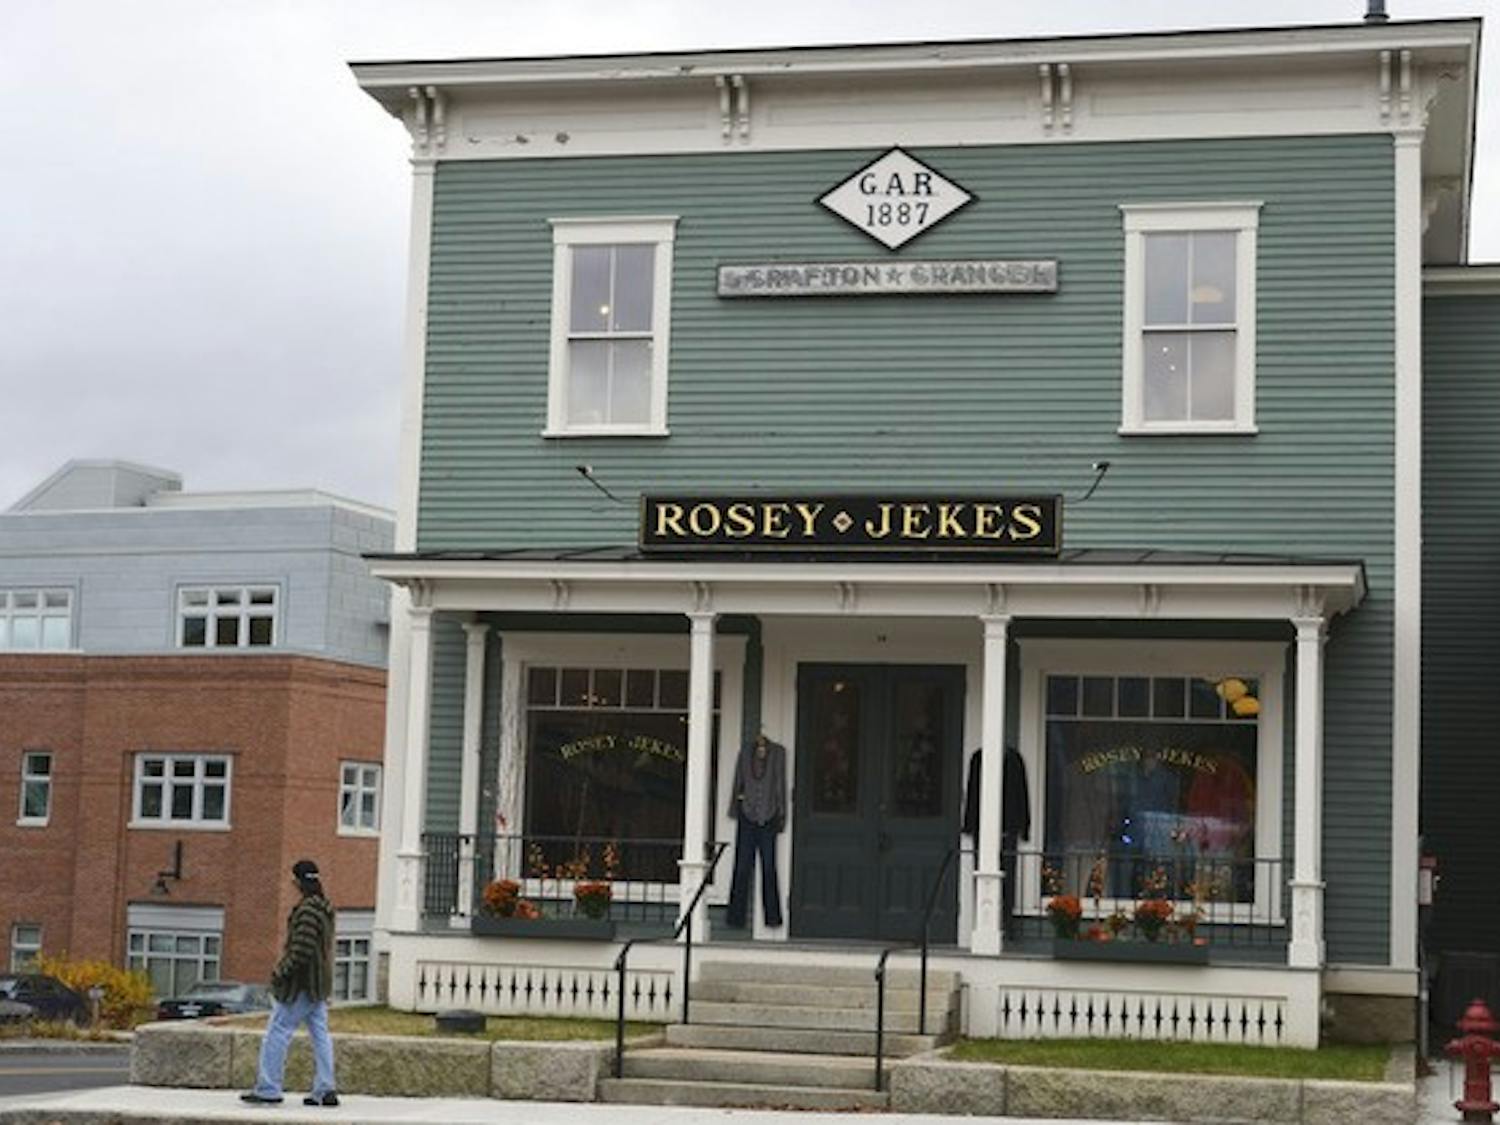 Motivated in part by an increasingly commercial atmosphere in Hanover, the Fabrikants plan to close Rosey Jekes clothing store and cafe in December.